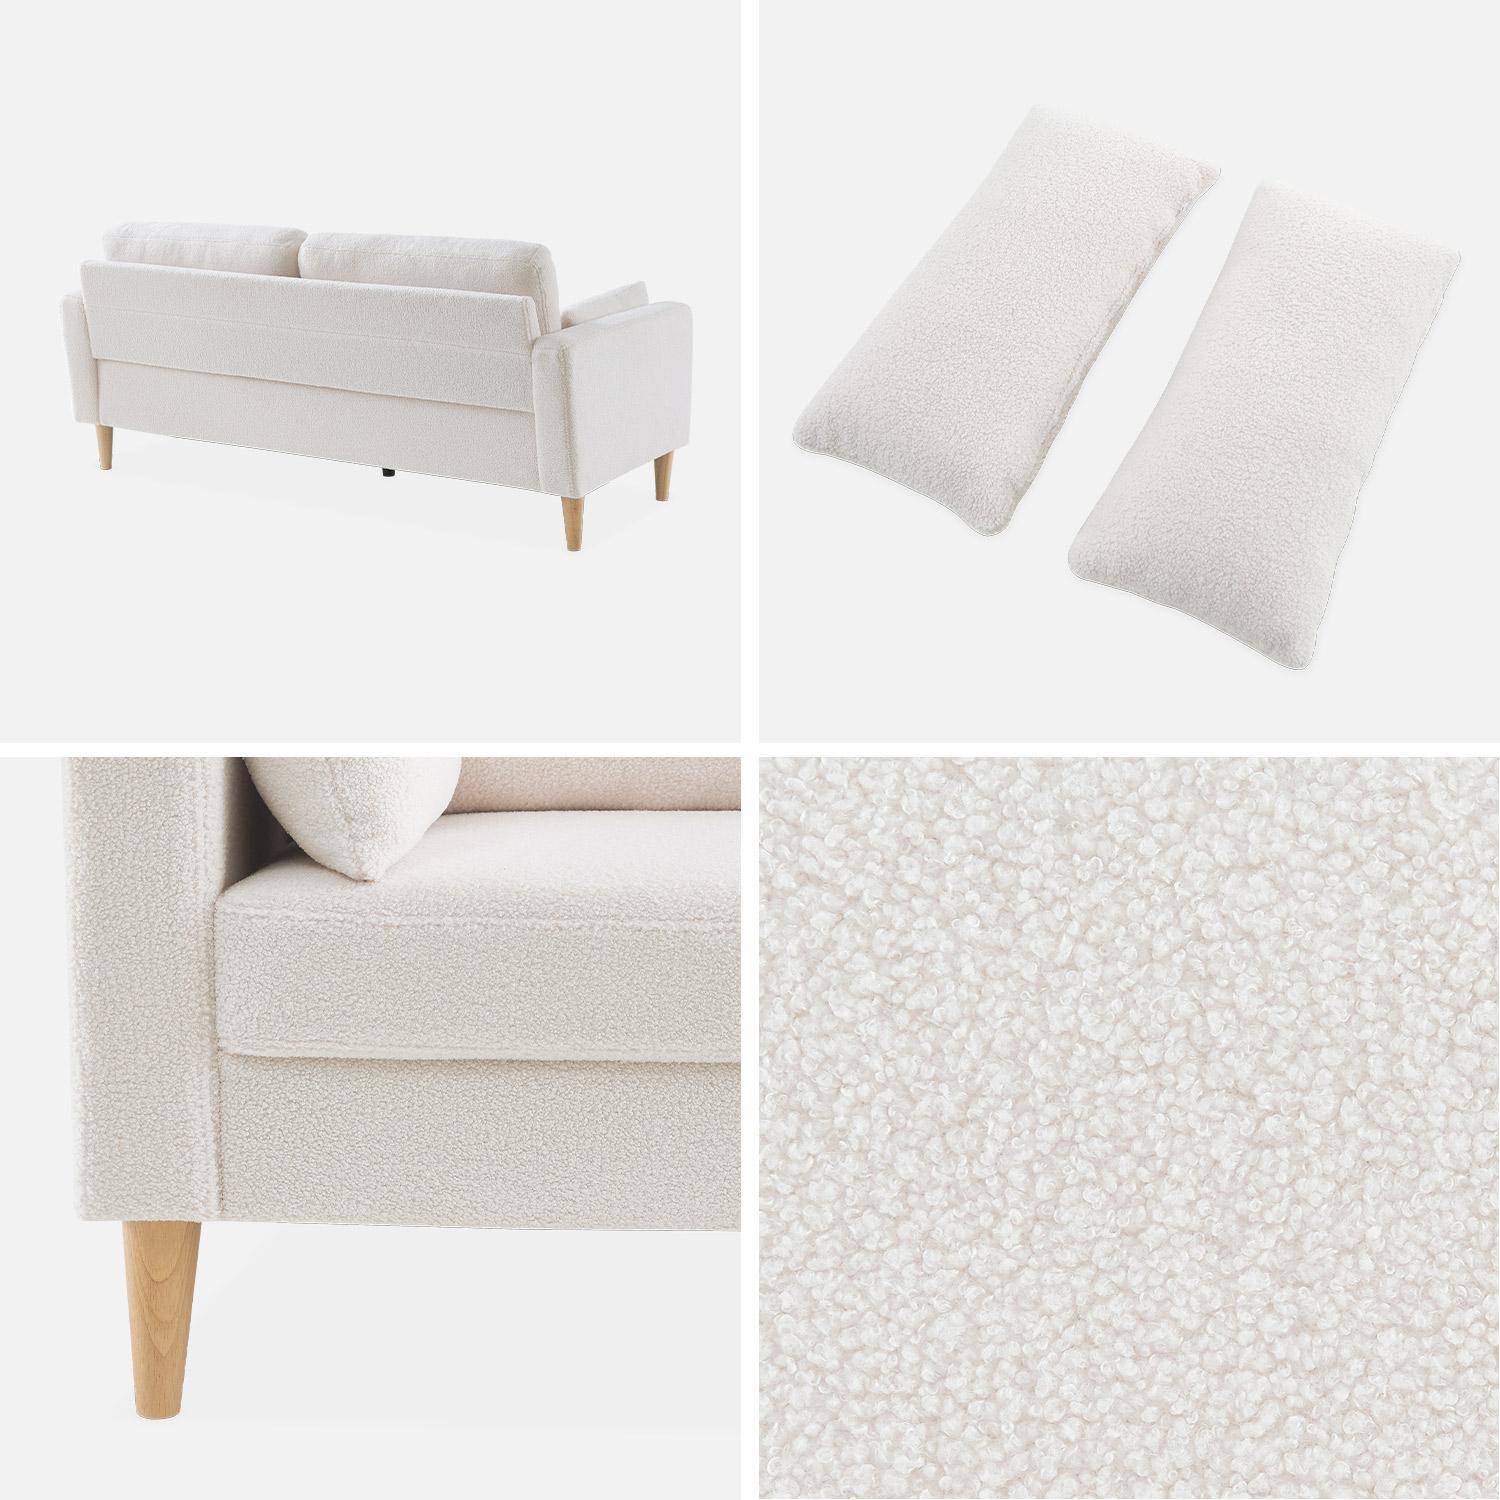 Large 3-seater sofa Scandi-style with wooden legs - Bjorn - white boucle,sweeek,Photo5